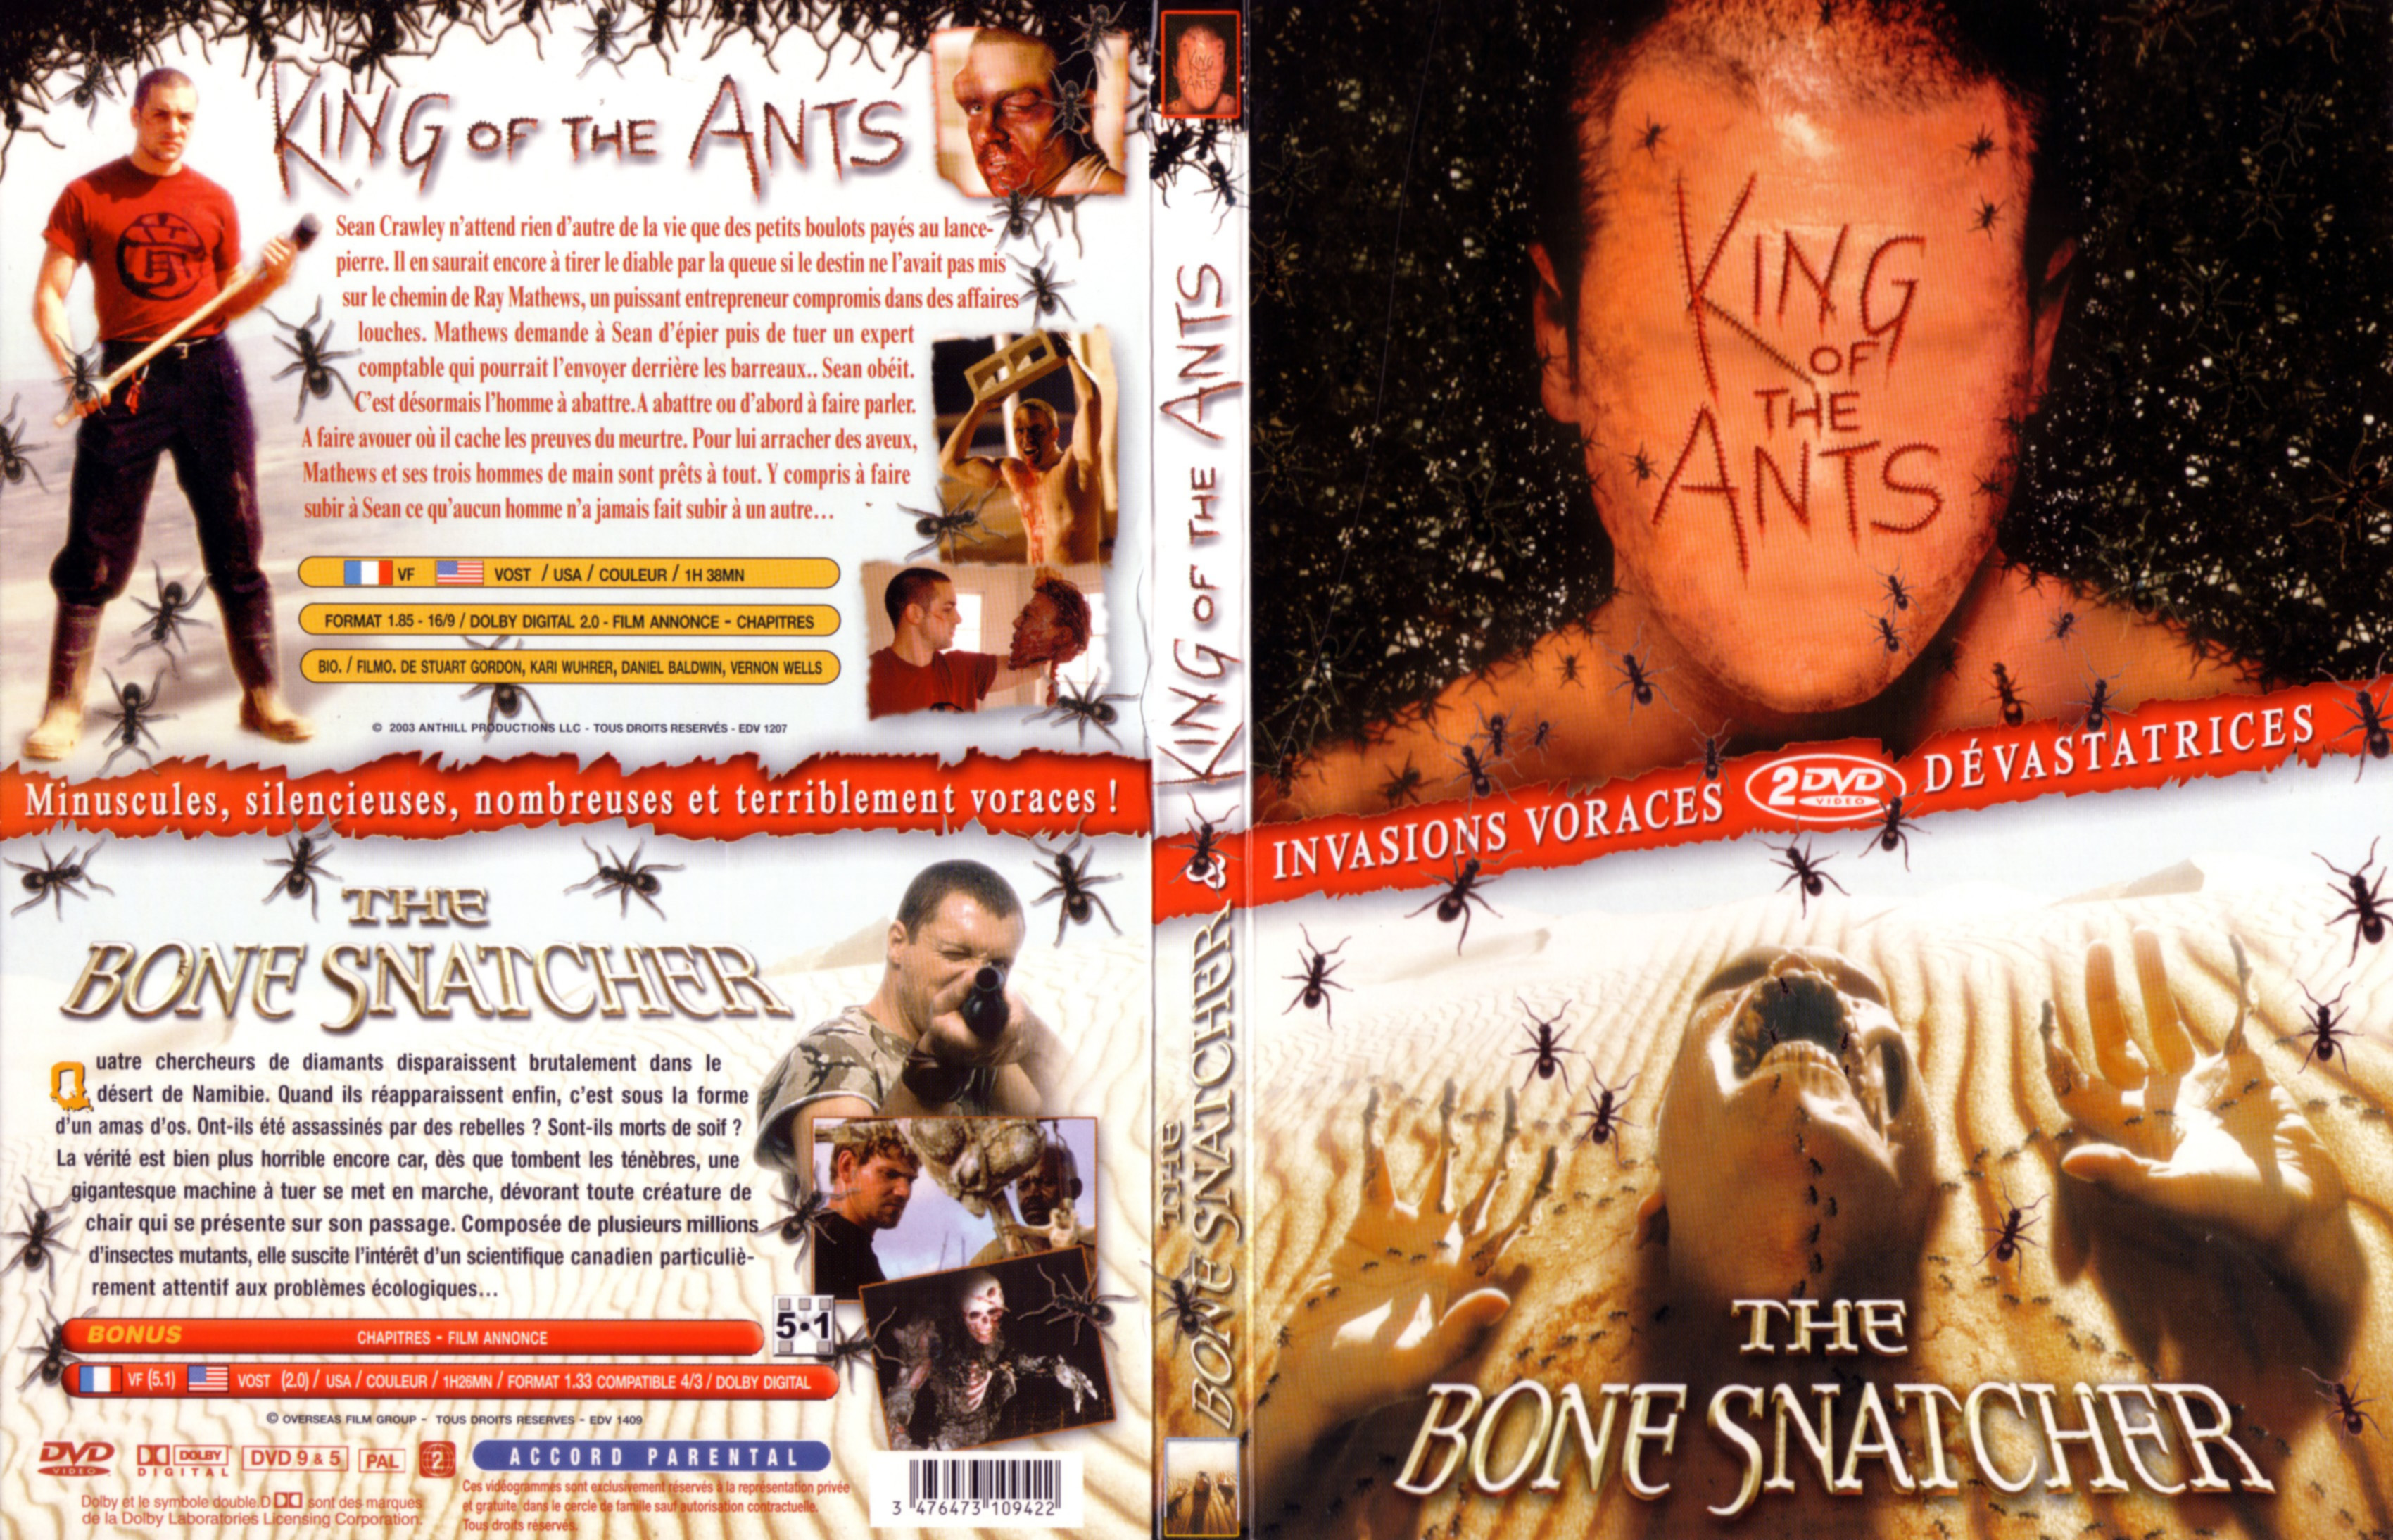 Jaquette DVD King of the ants + The bone snatcher